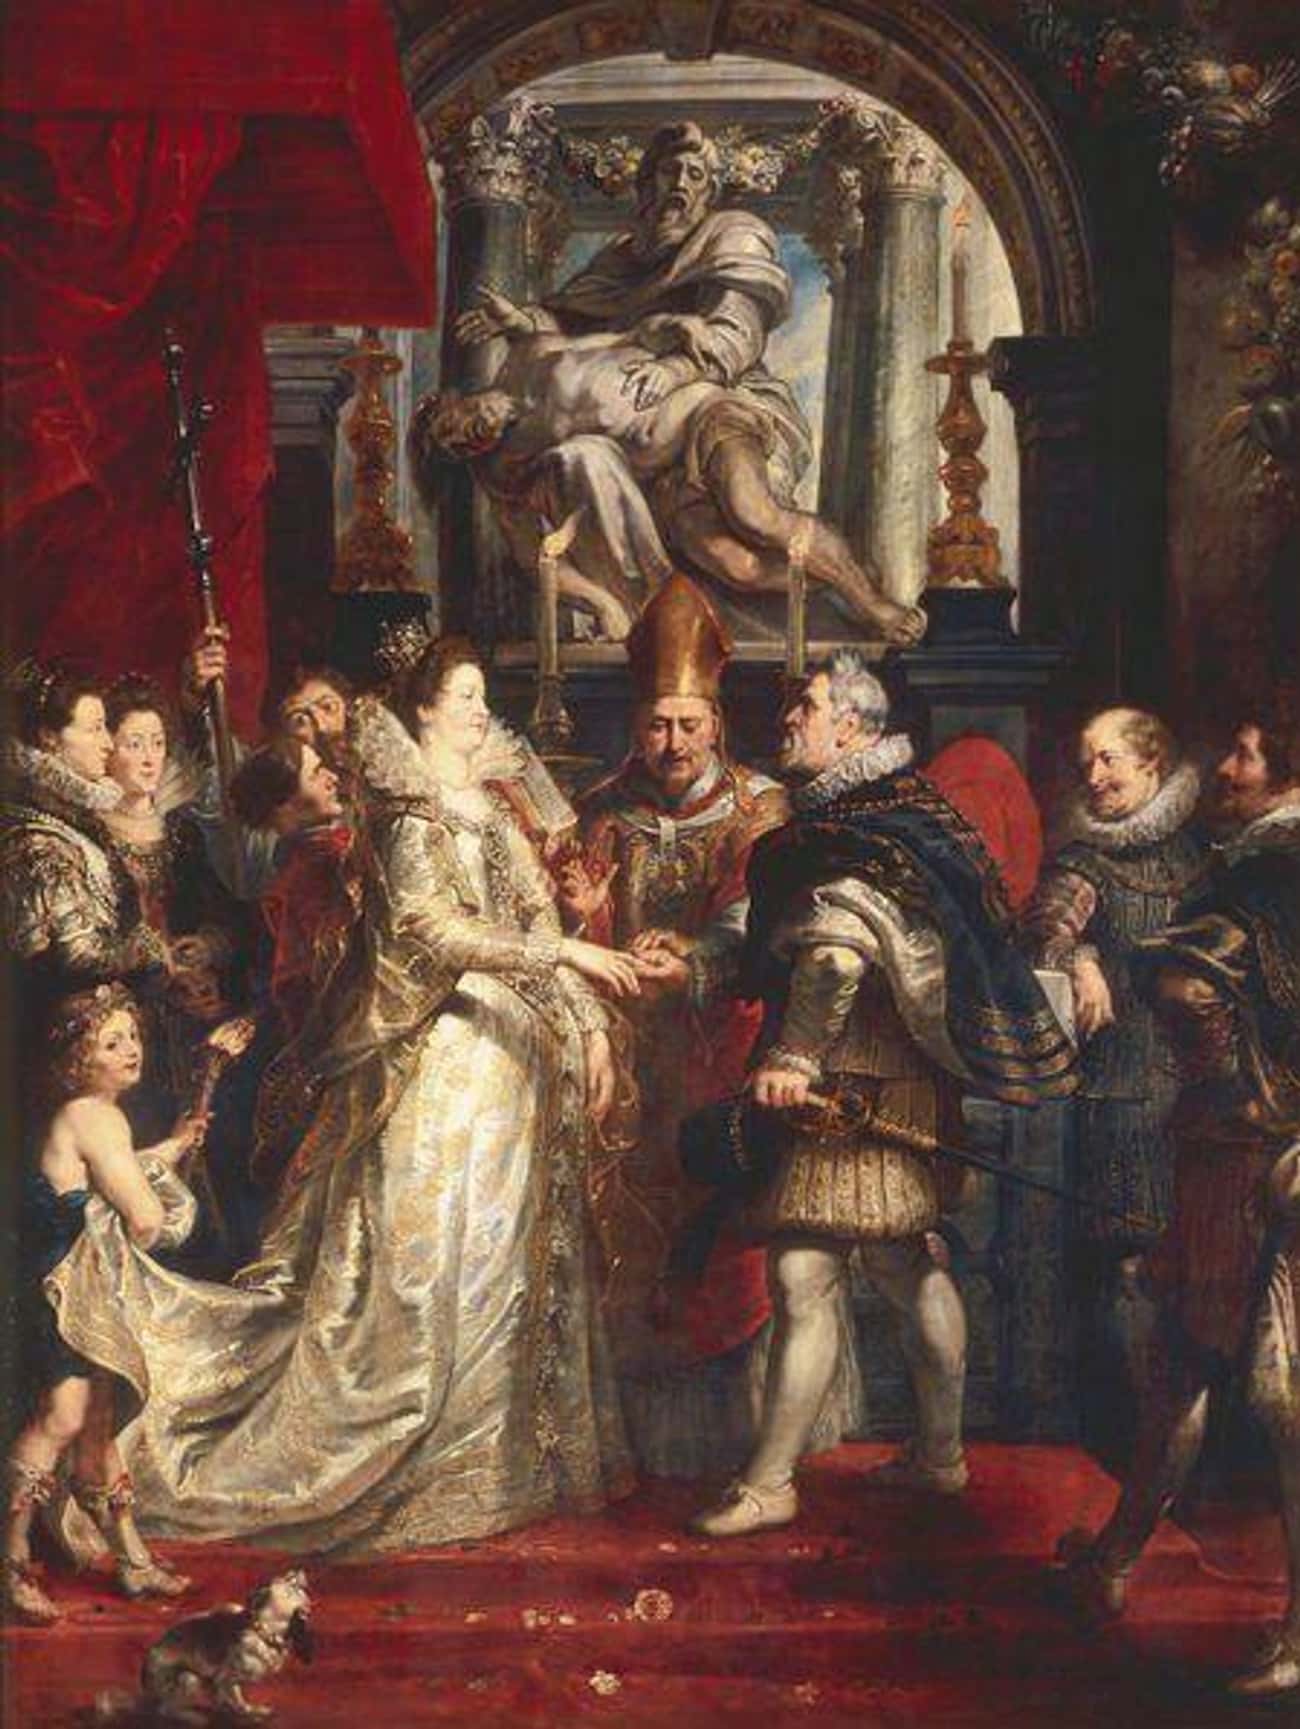 The King Of France Was Desperate For Heirs And Marie Was Fertile And Wealthy